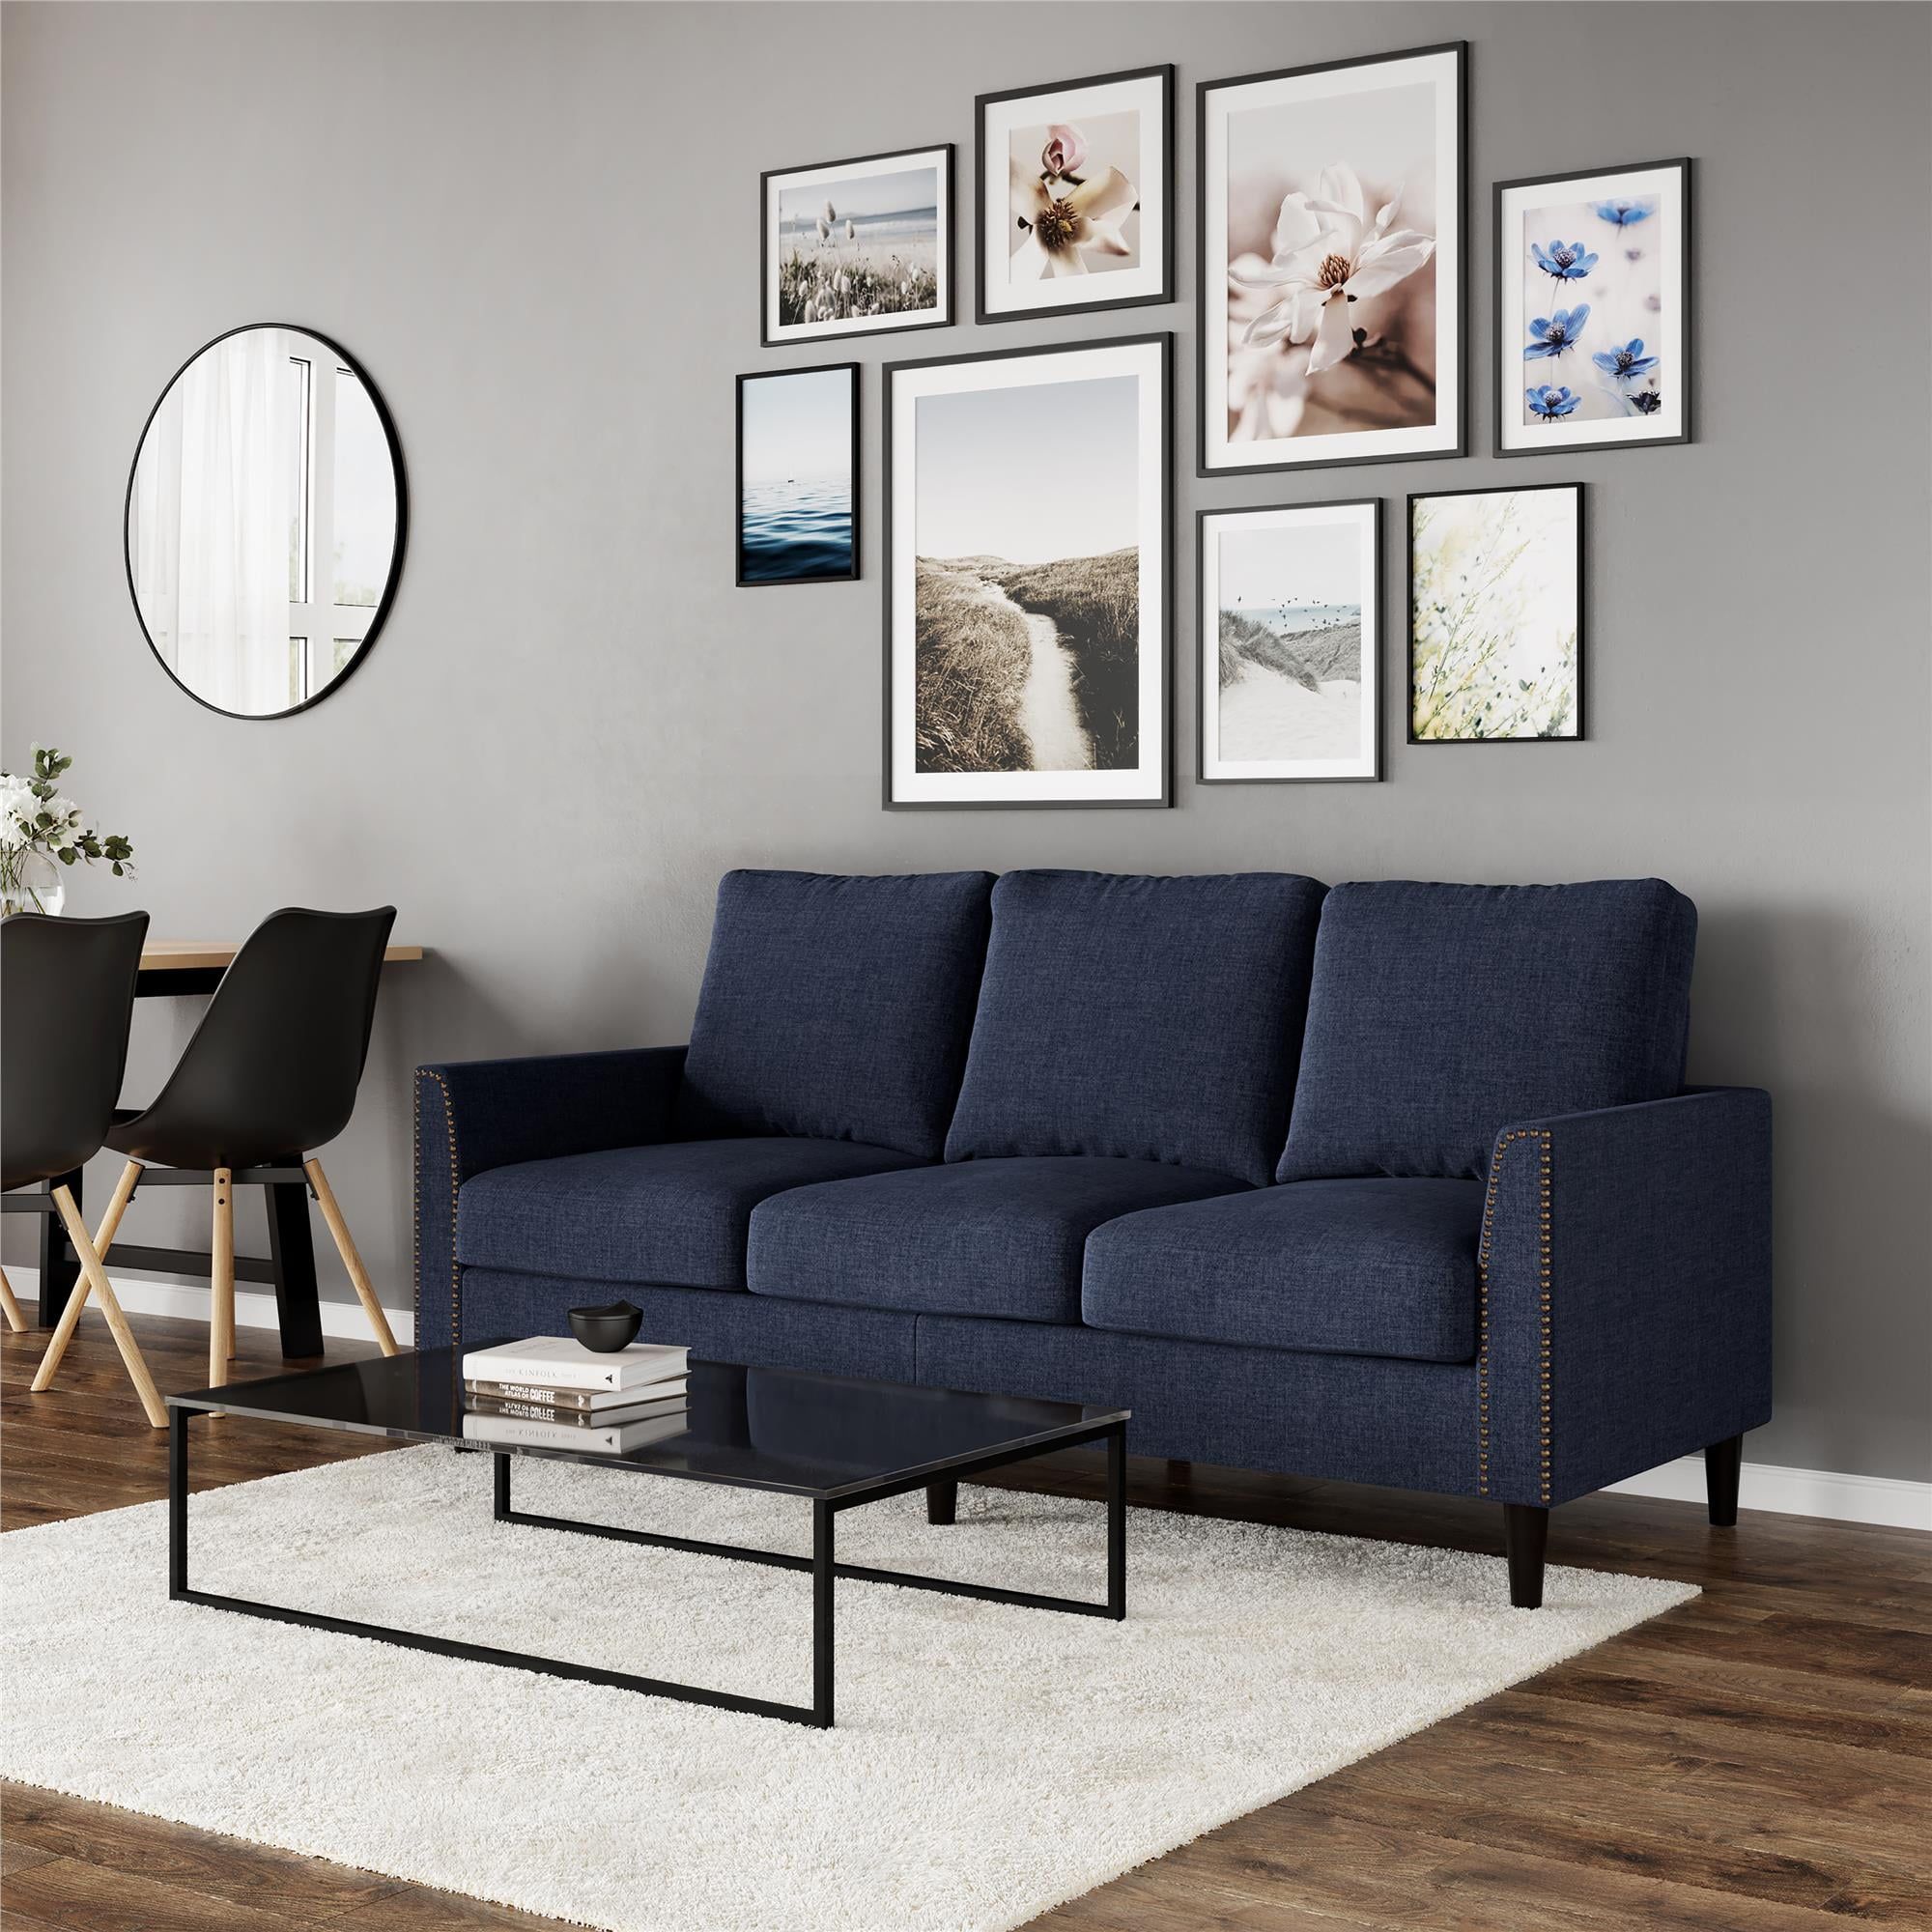 Queer Eye Cambridge Sofa With Nailhead Trim, Modern Couch, Blue Linen –  Walmart With Modern Blue Linen Sofas (View 7 of 15)